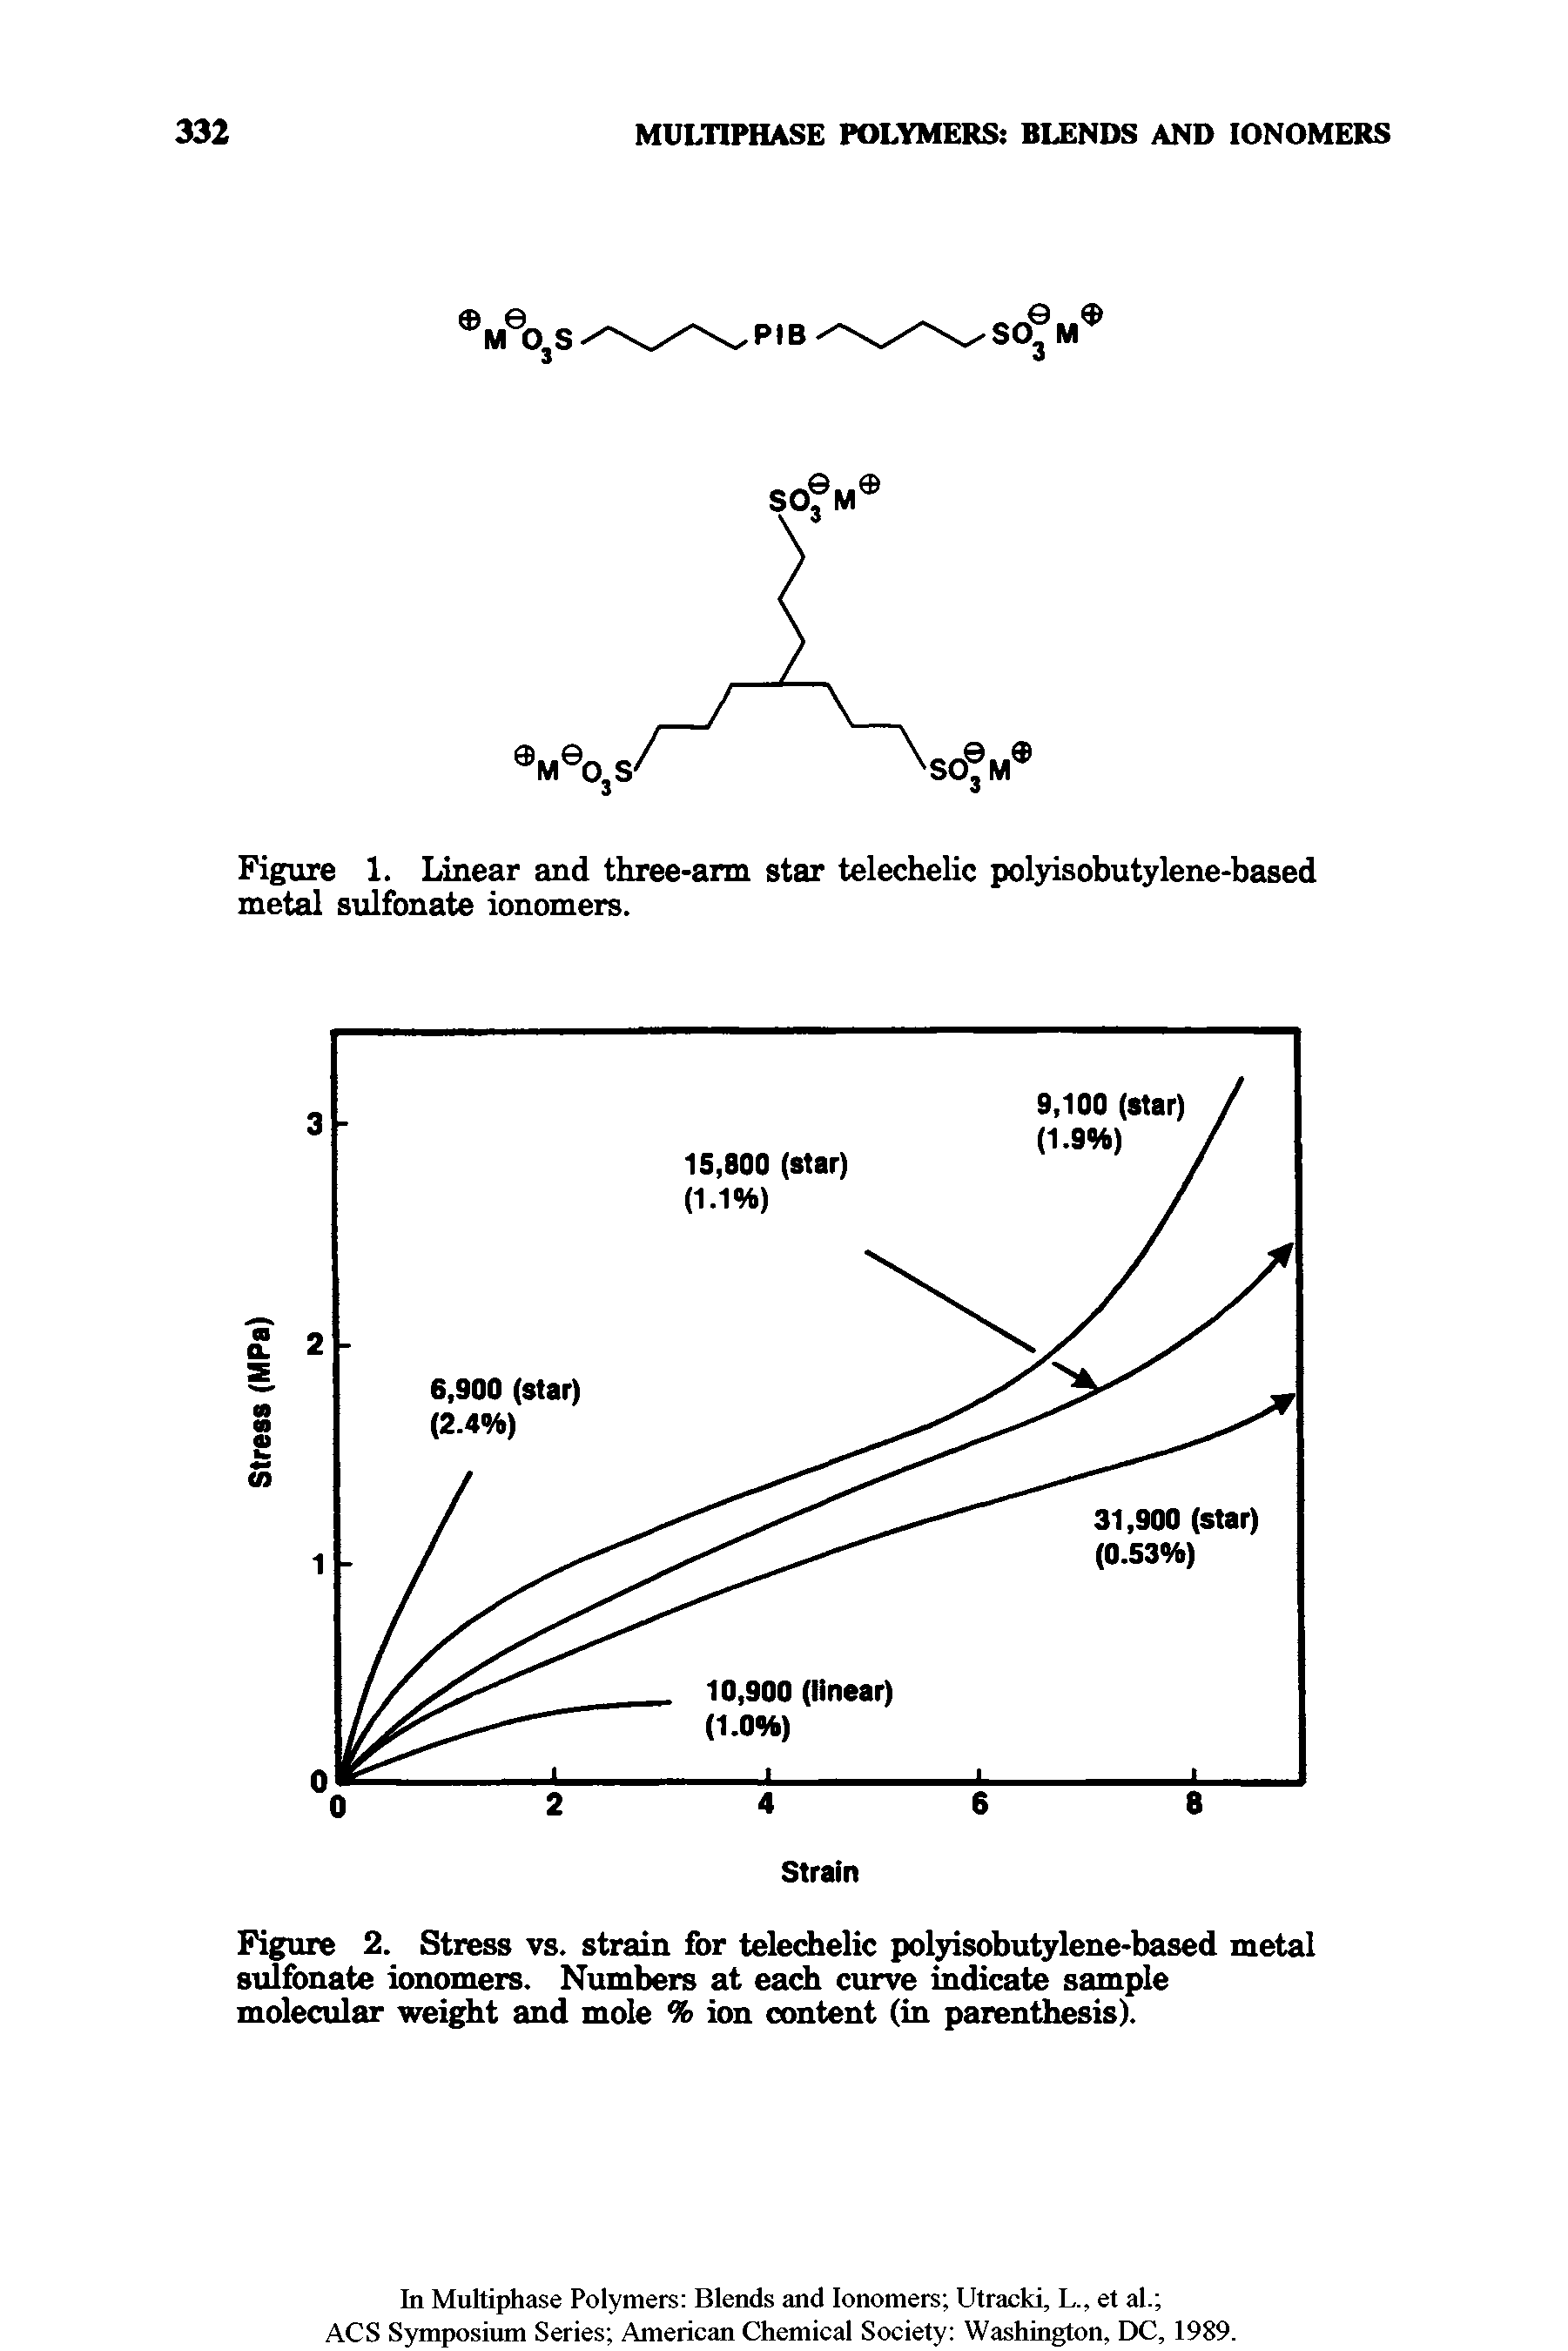 Figure 2. Stress vs. strain for telechelic polyisobutylene-based metal sulfonate ionomers. Numbers at each curve indicate sample molecular weight and mole % ion content (in parenthesis).